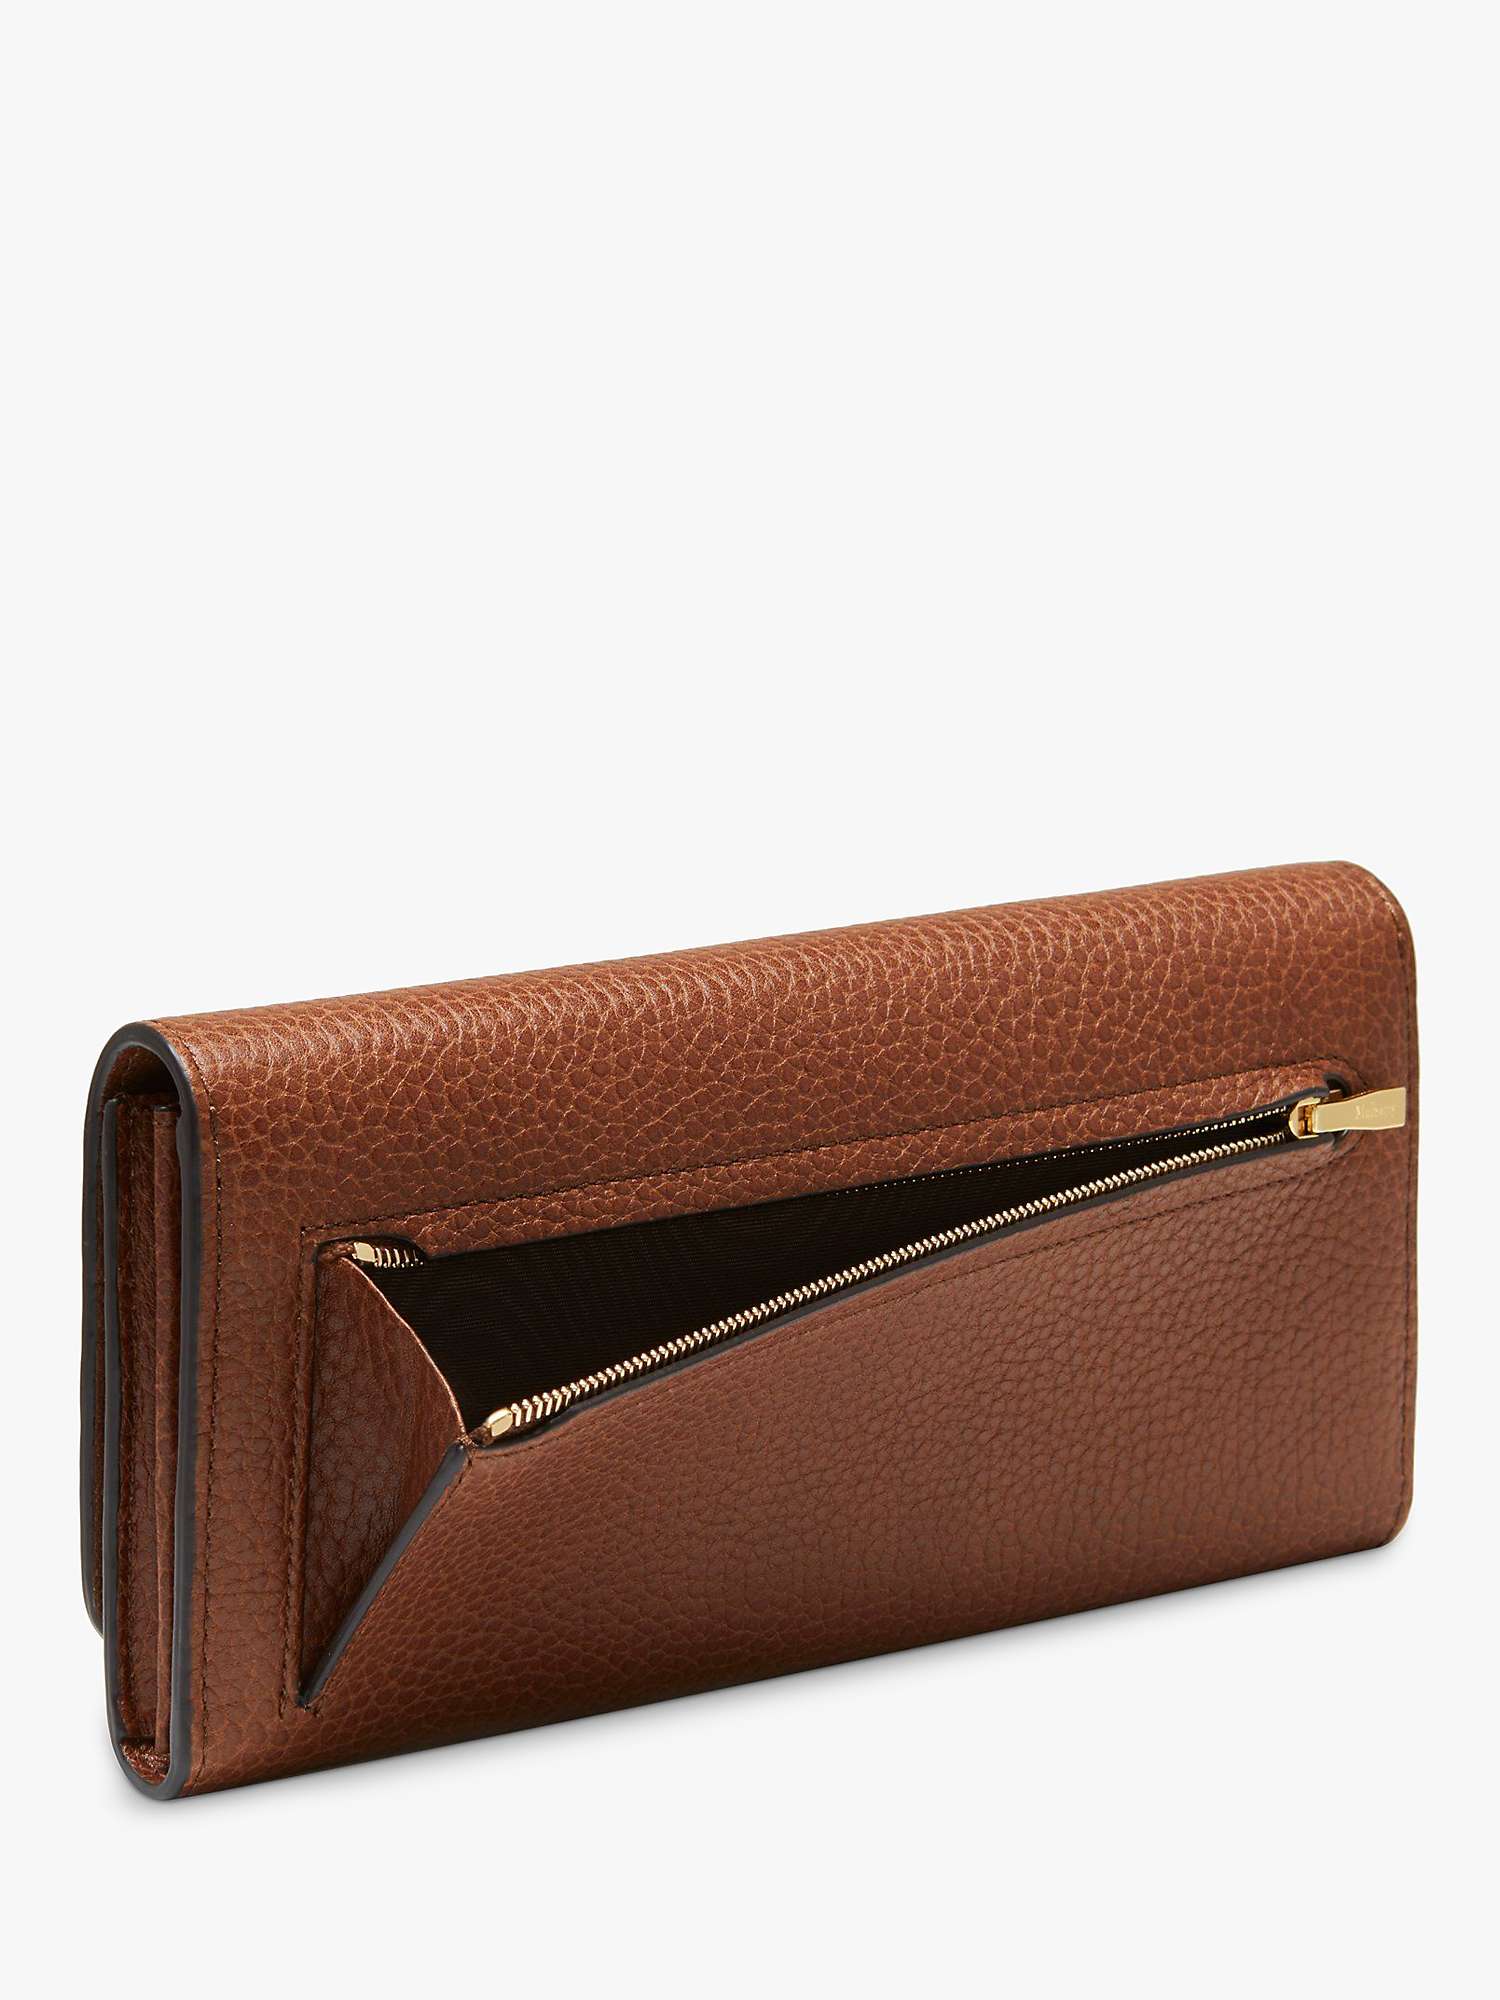 Buy Mulberry Small Classic Grain Leather Continental Wallet Online at johnlewis.com